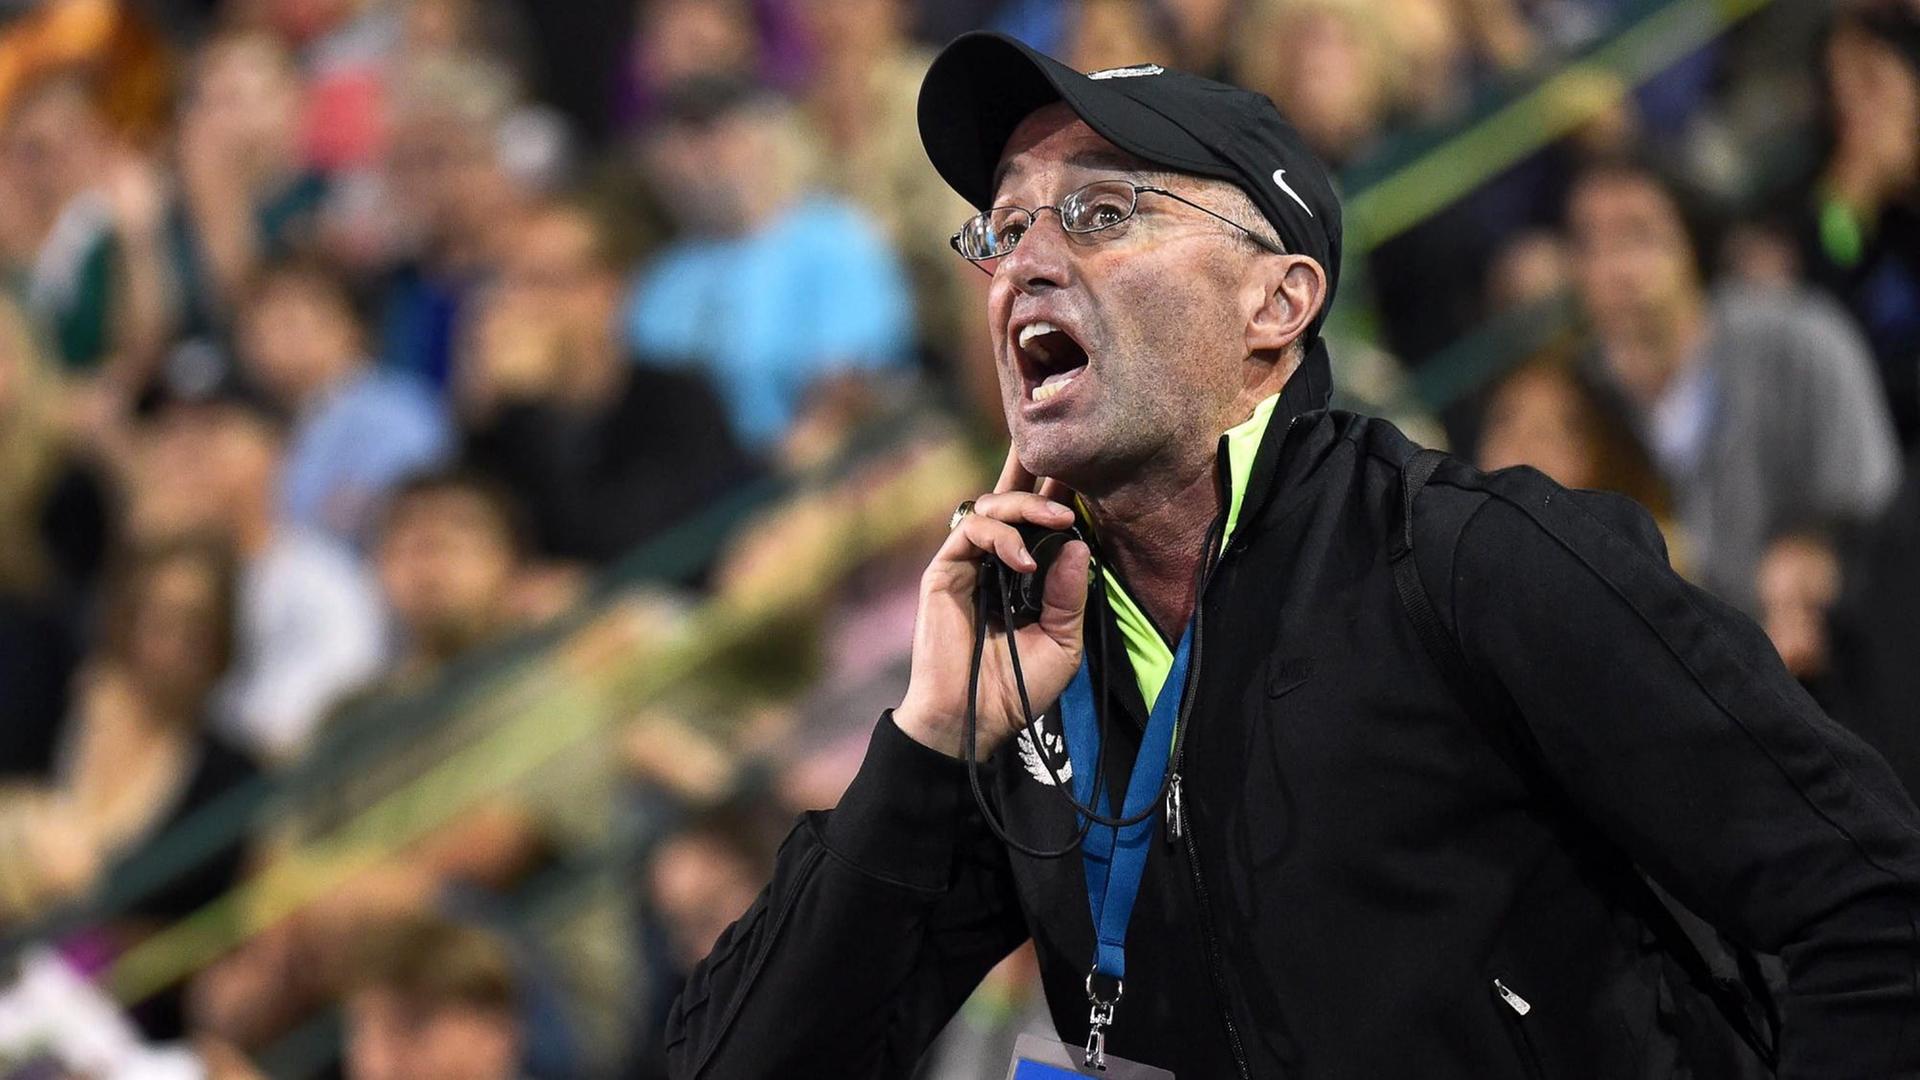 epa04775010 US track coach Alberto Salazar of Britain's Mo Farah reacts during the men's 10,000m race during the Prefontaine Classic Diamond League meeting at Hayward Field in Eugene, Oregon, USA, 29 May 2015. EPA/STEVE DYKES |